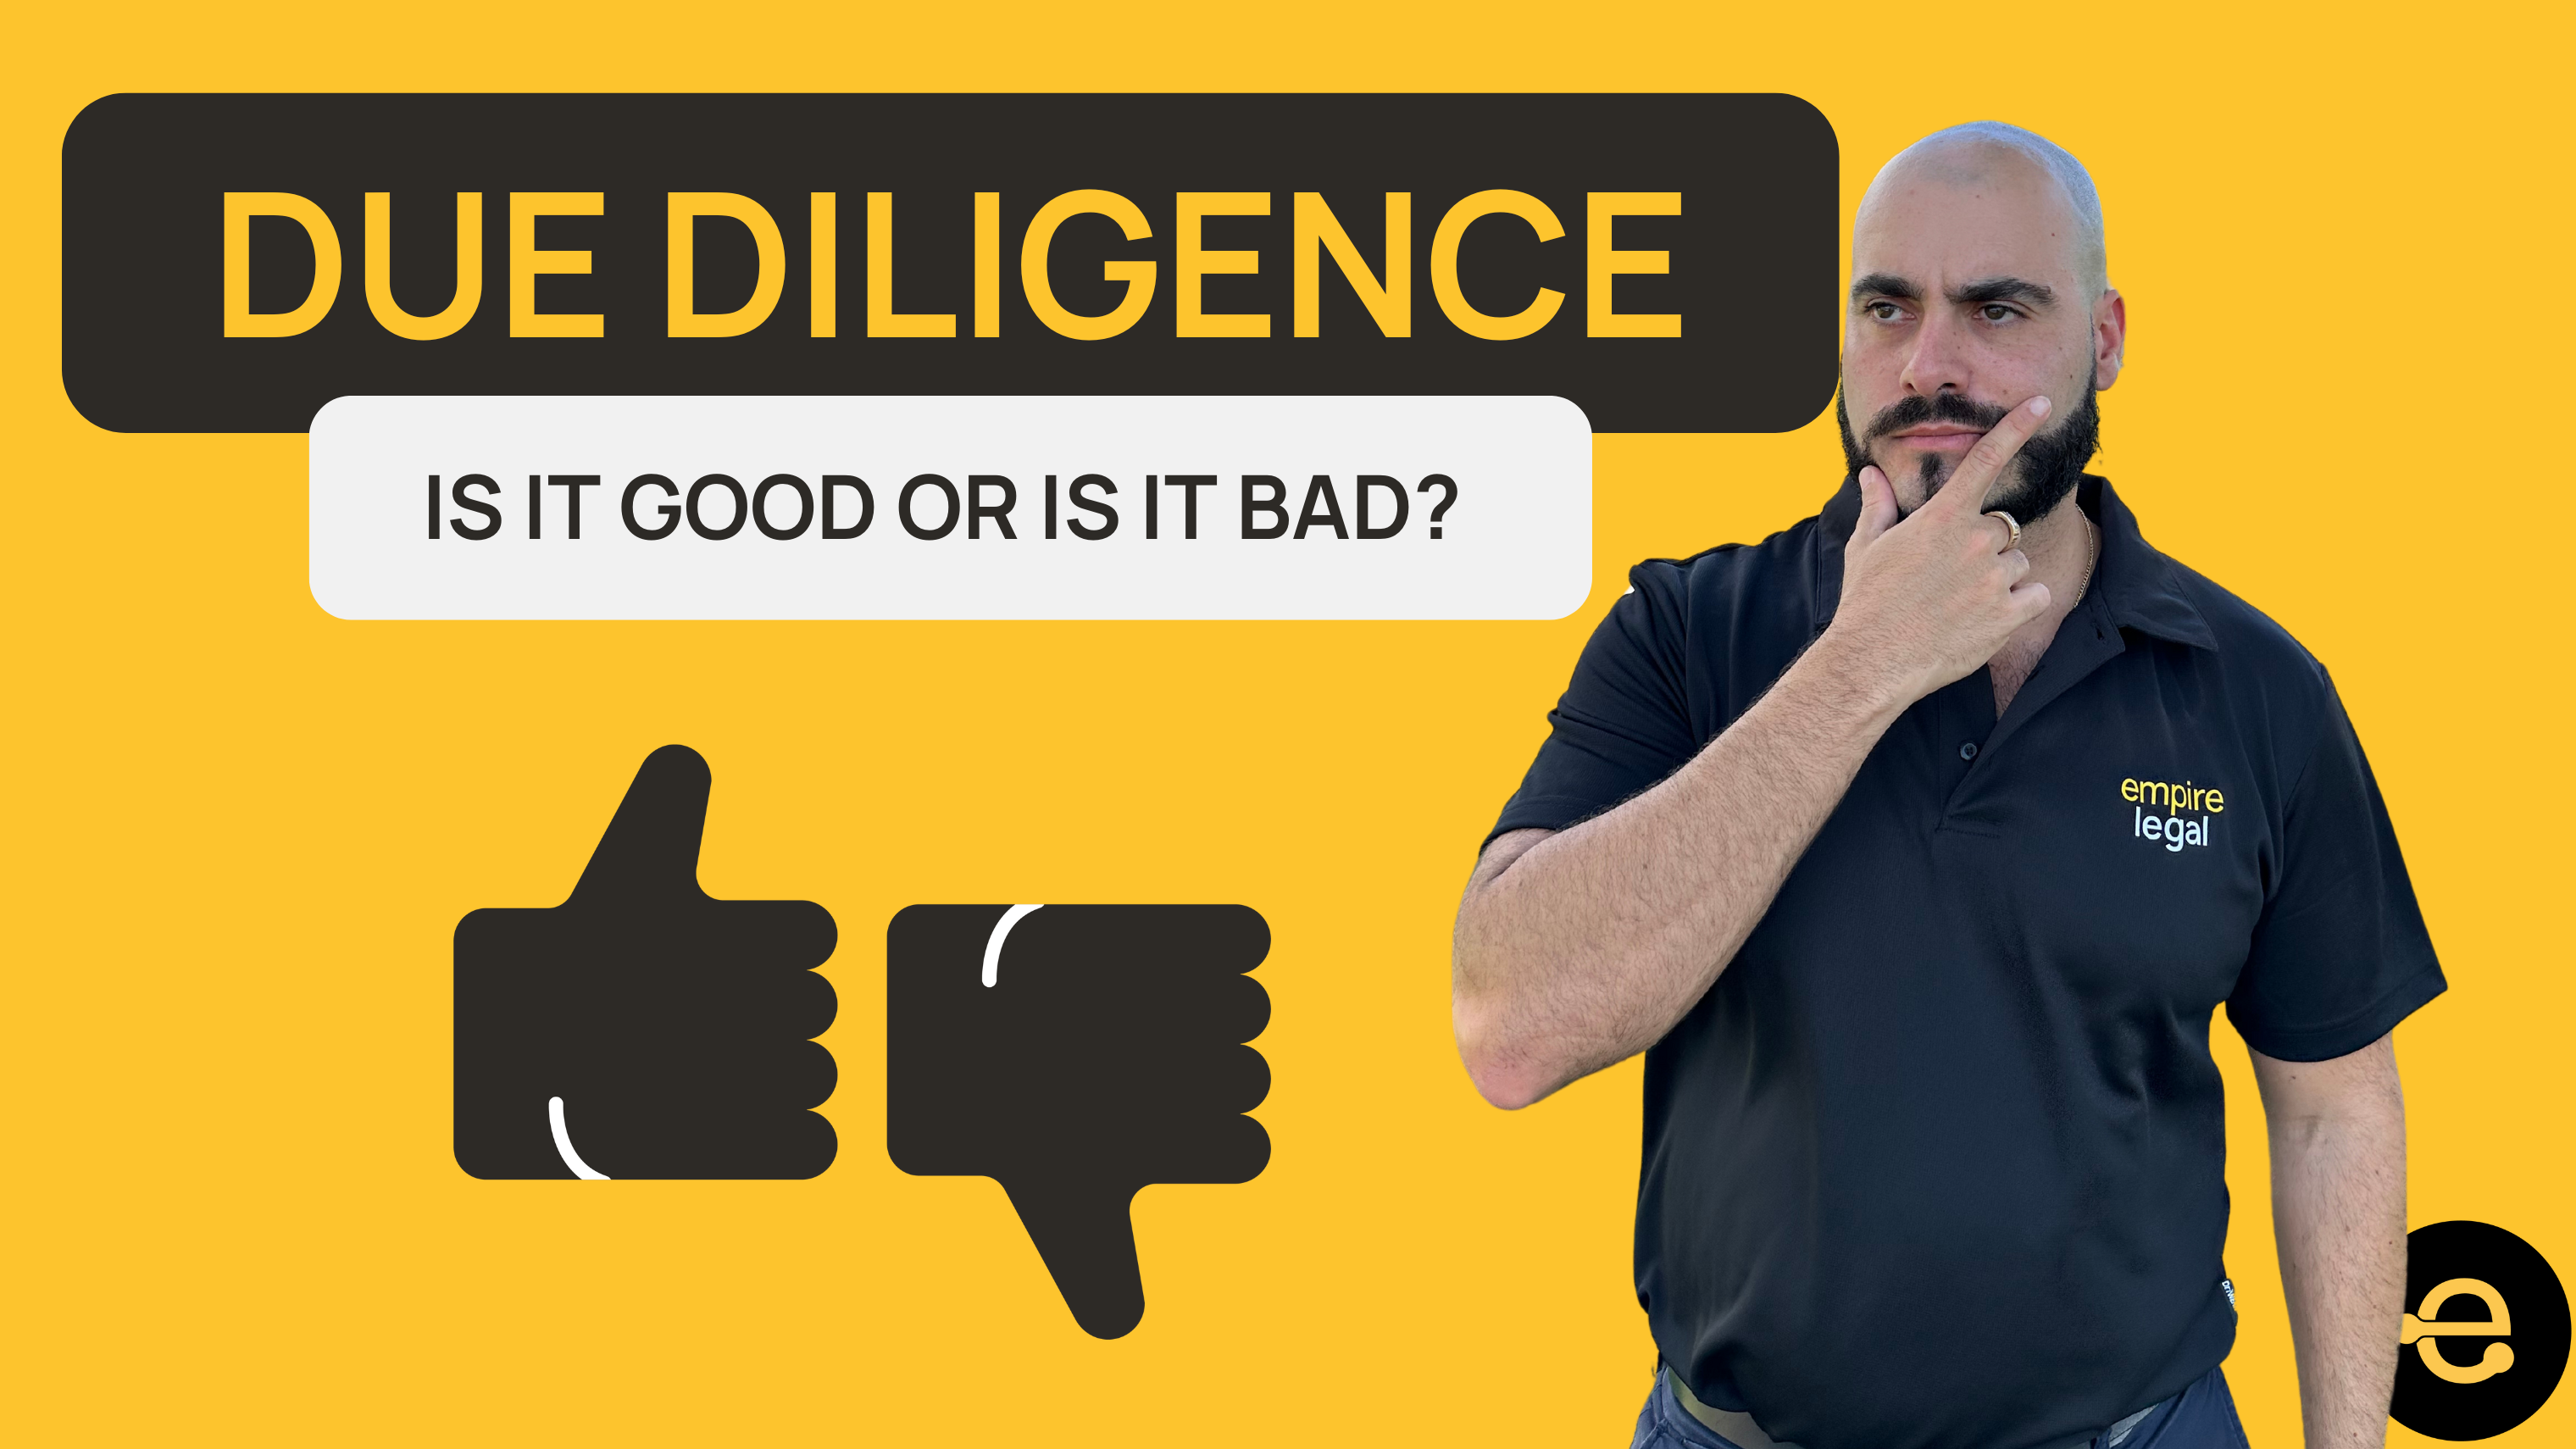 Due Diligence for QLD property - is it good or bad?